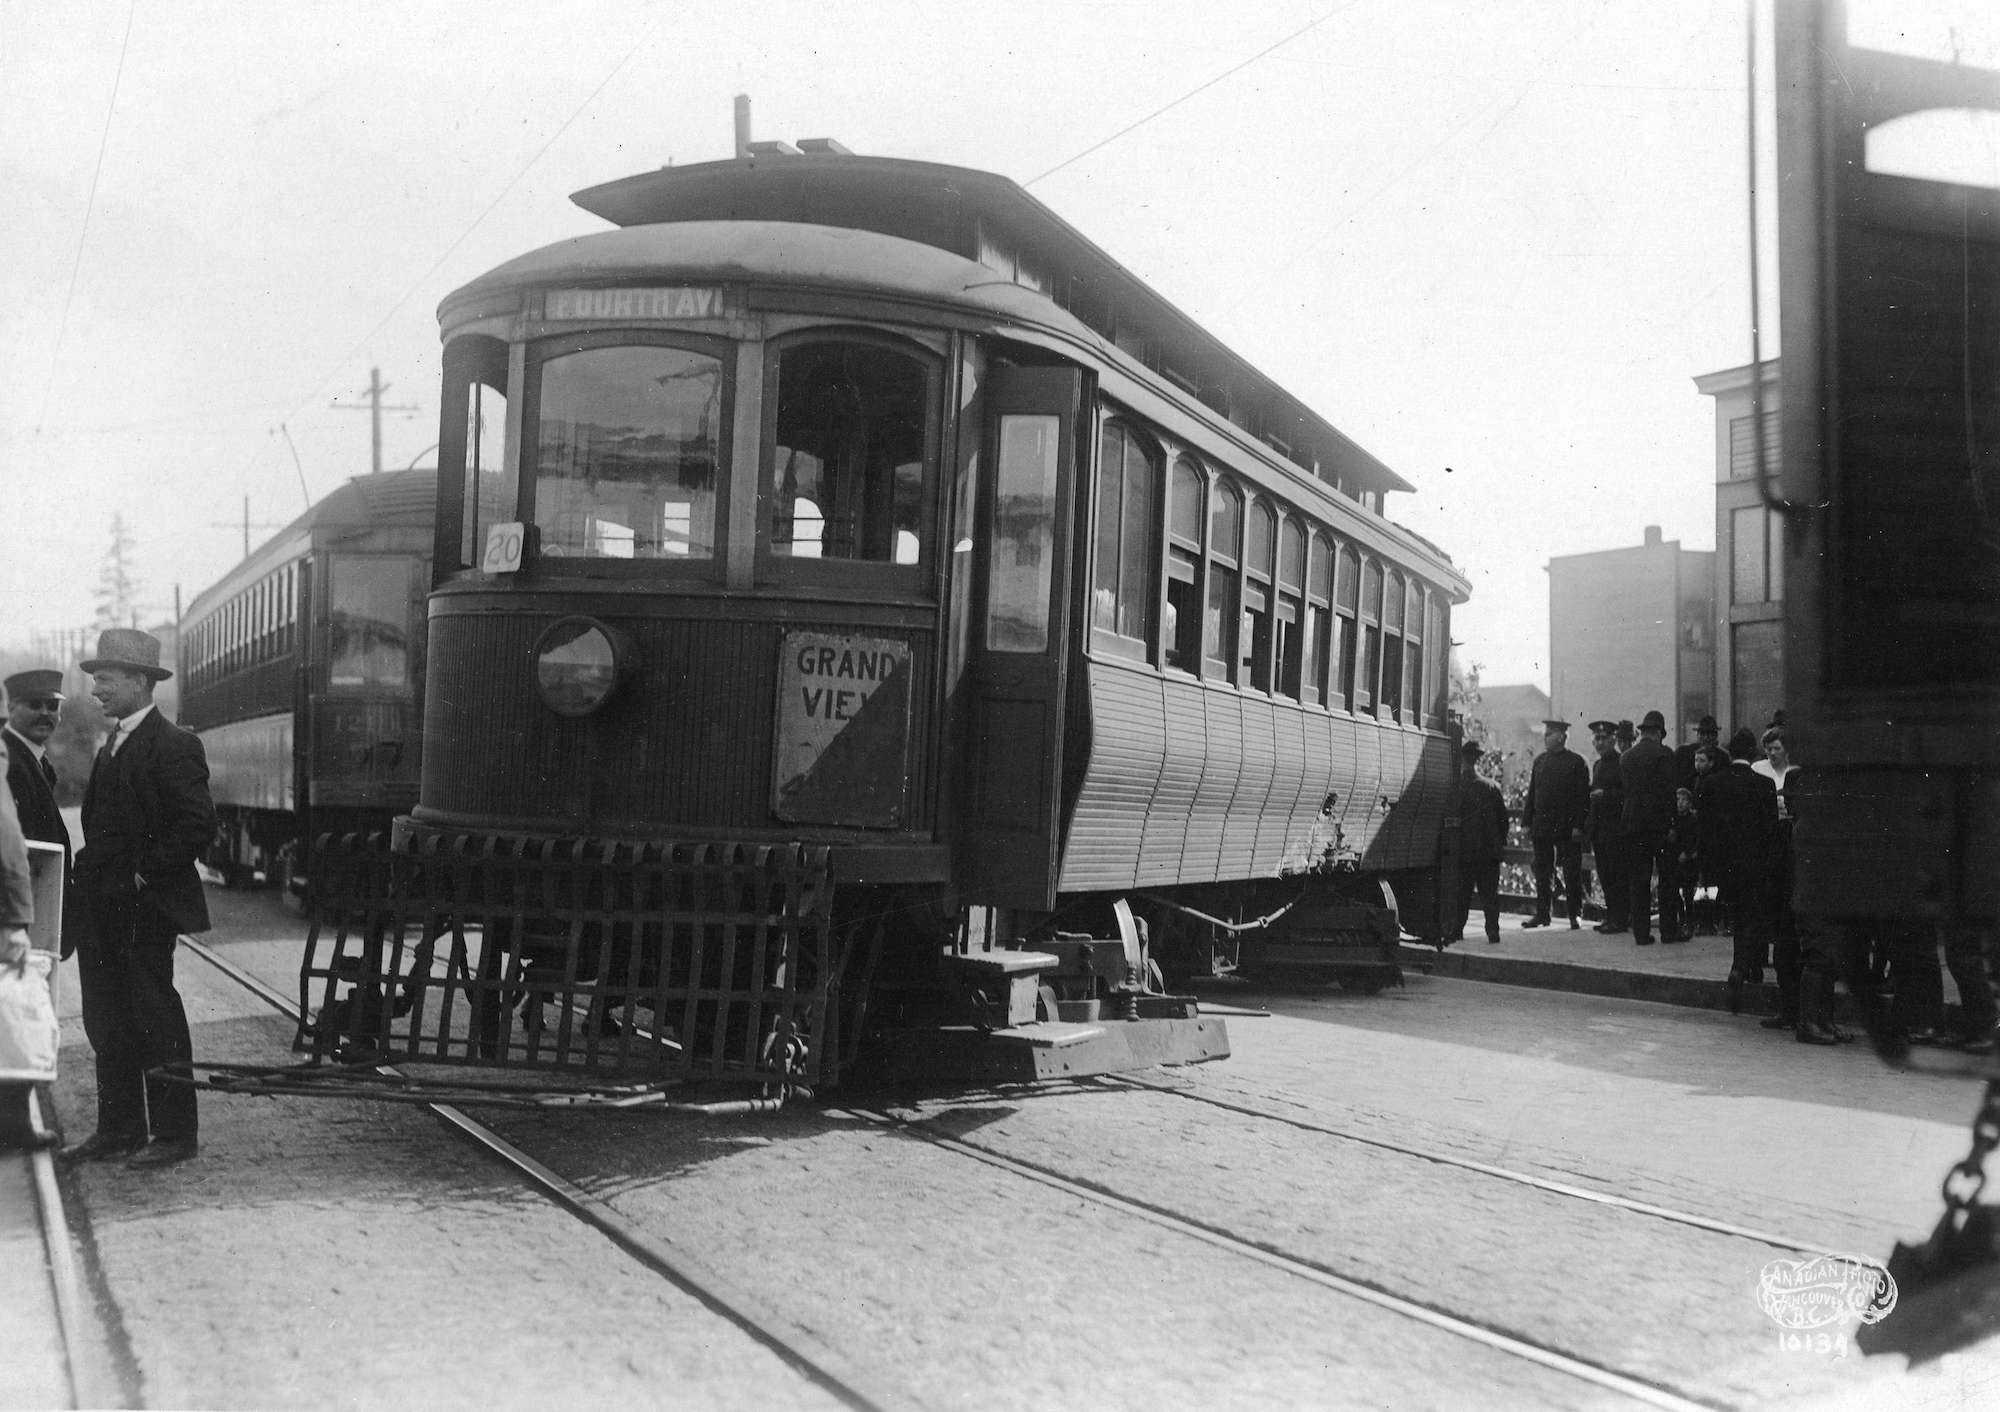 1918 - A streetcar derailed after being hit by the No. 11 V.F.D. hosewagon at 12th Avenue and Commercial Drive